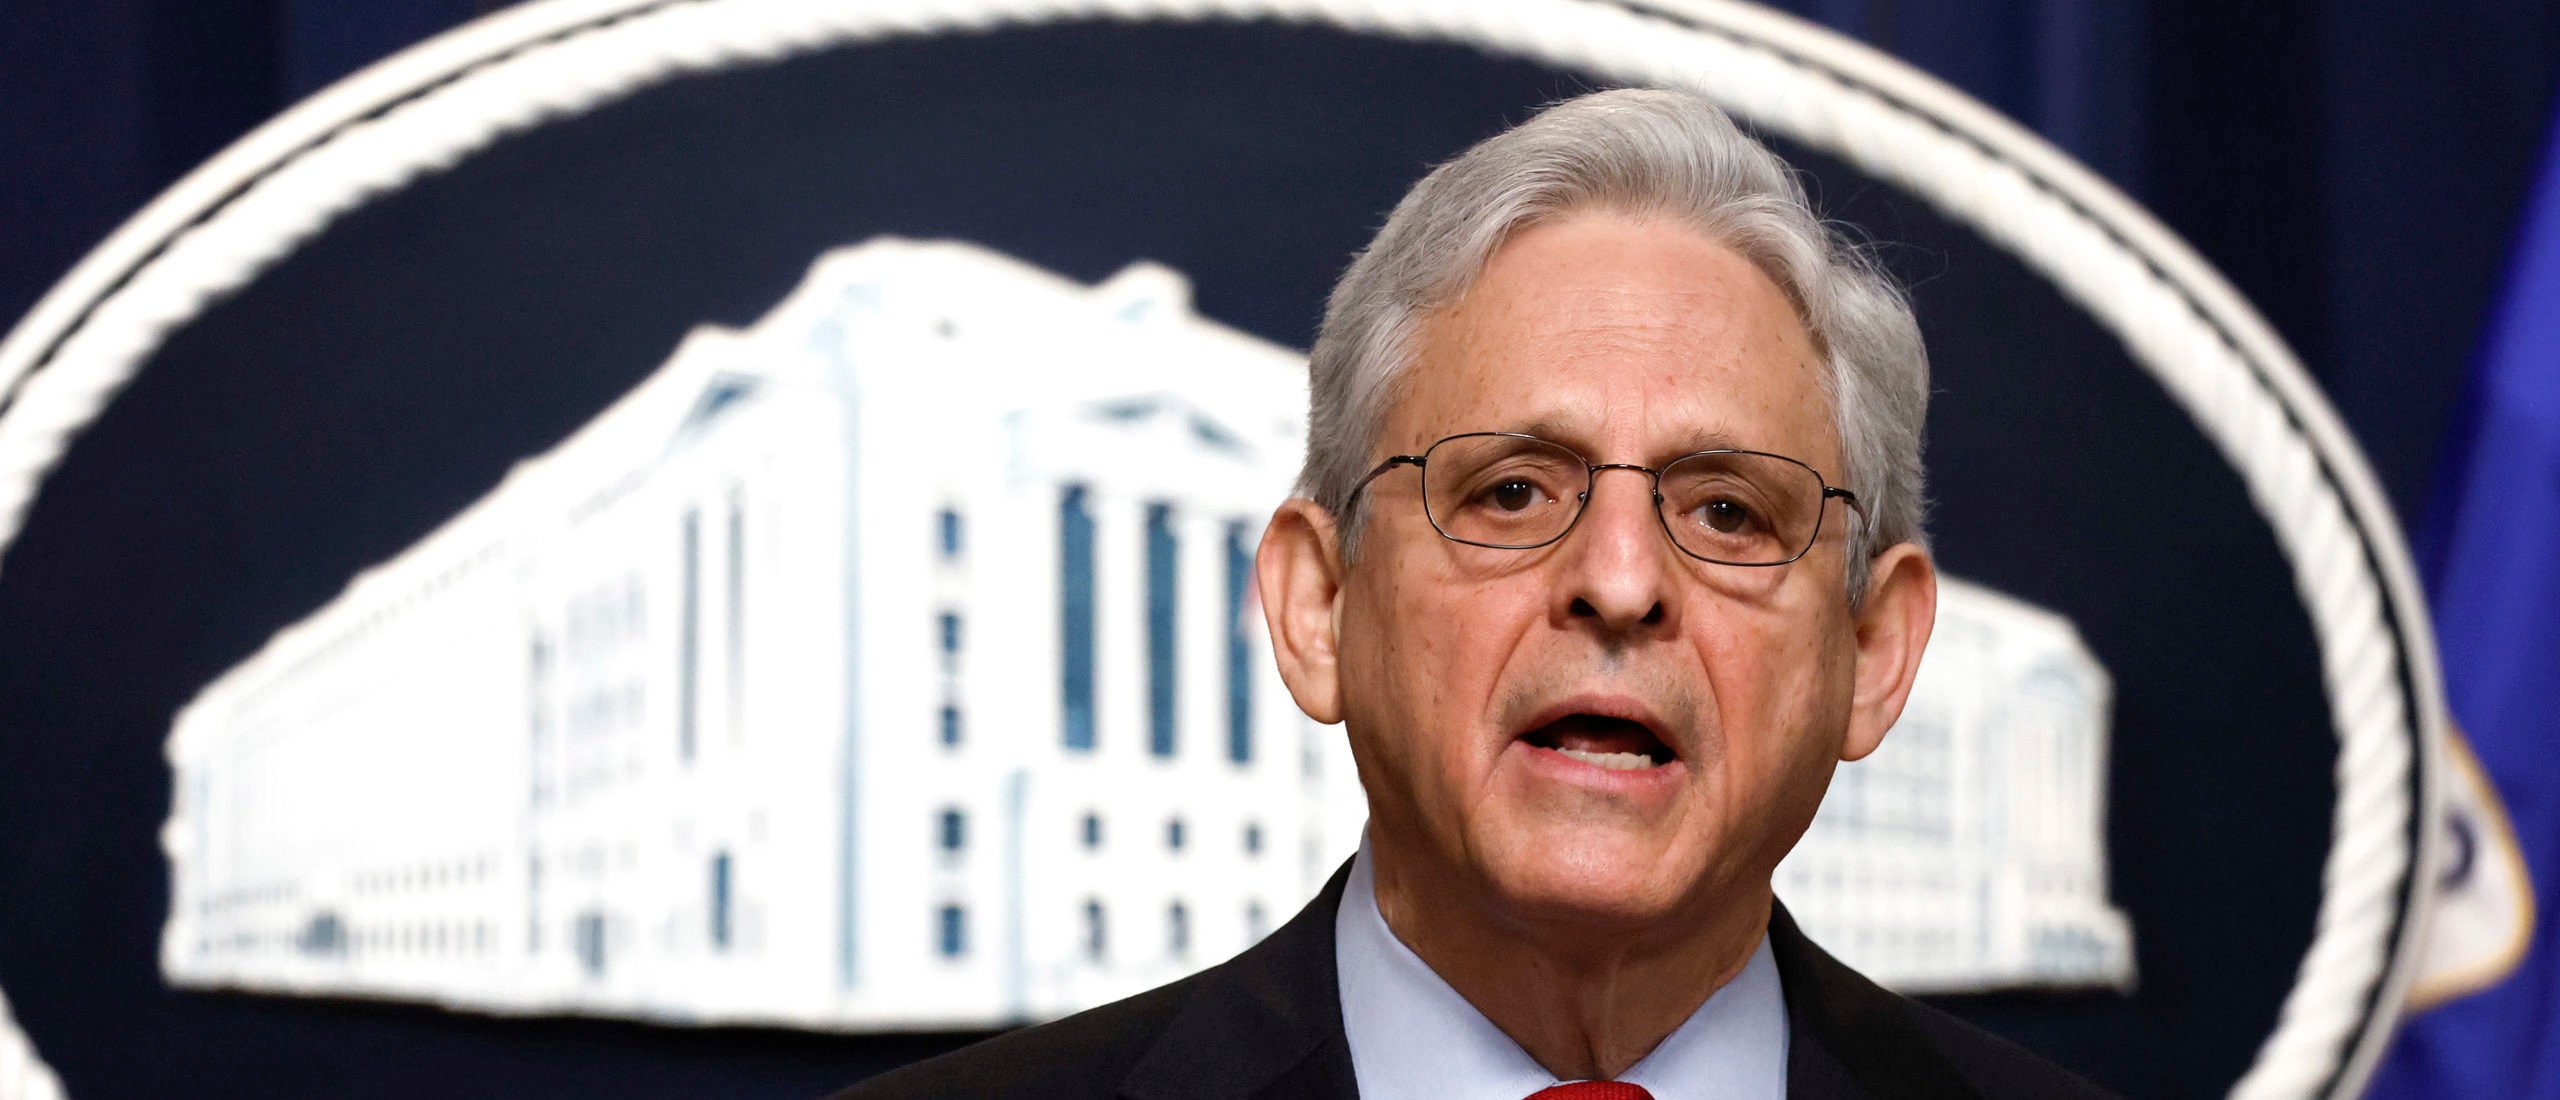 WASHINGTON, DC - MAY 02: Attorney General Merrick Garland speaks at a news conference at the U.S. Department of Justice on May 02, 2023 in Washington, DC. Garland updated reporters on the department's investigative operation targeting fentanyl and opioid traffickers on the Darknet. (Photo by Anna Moneymaker/Getty Images)